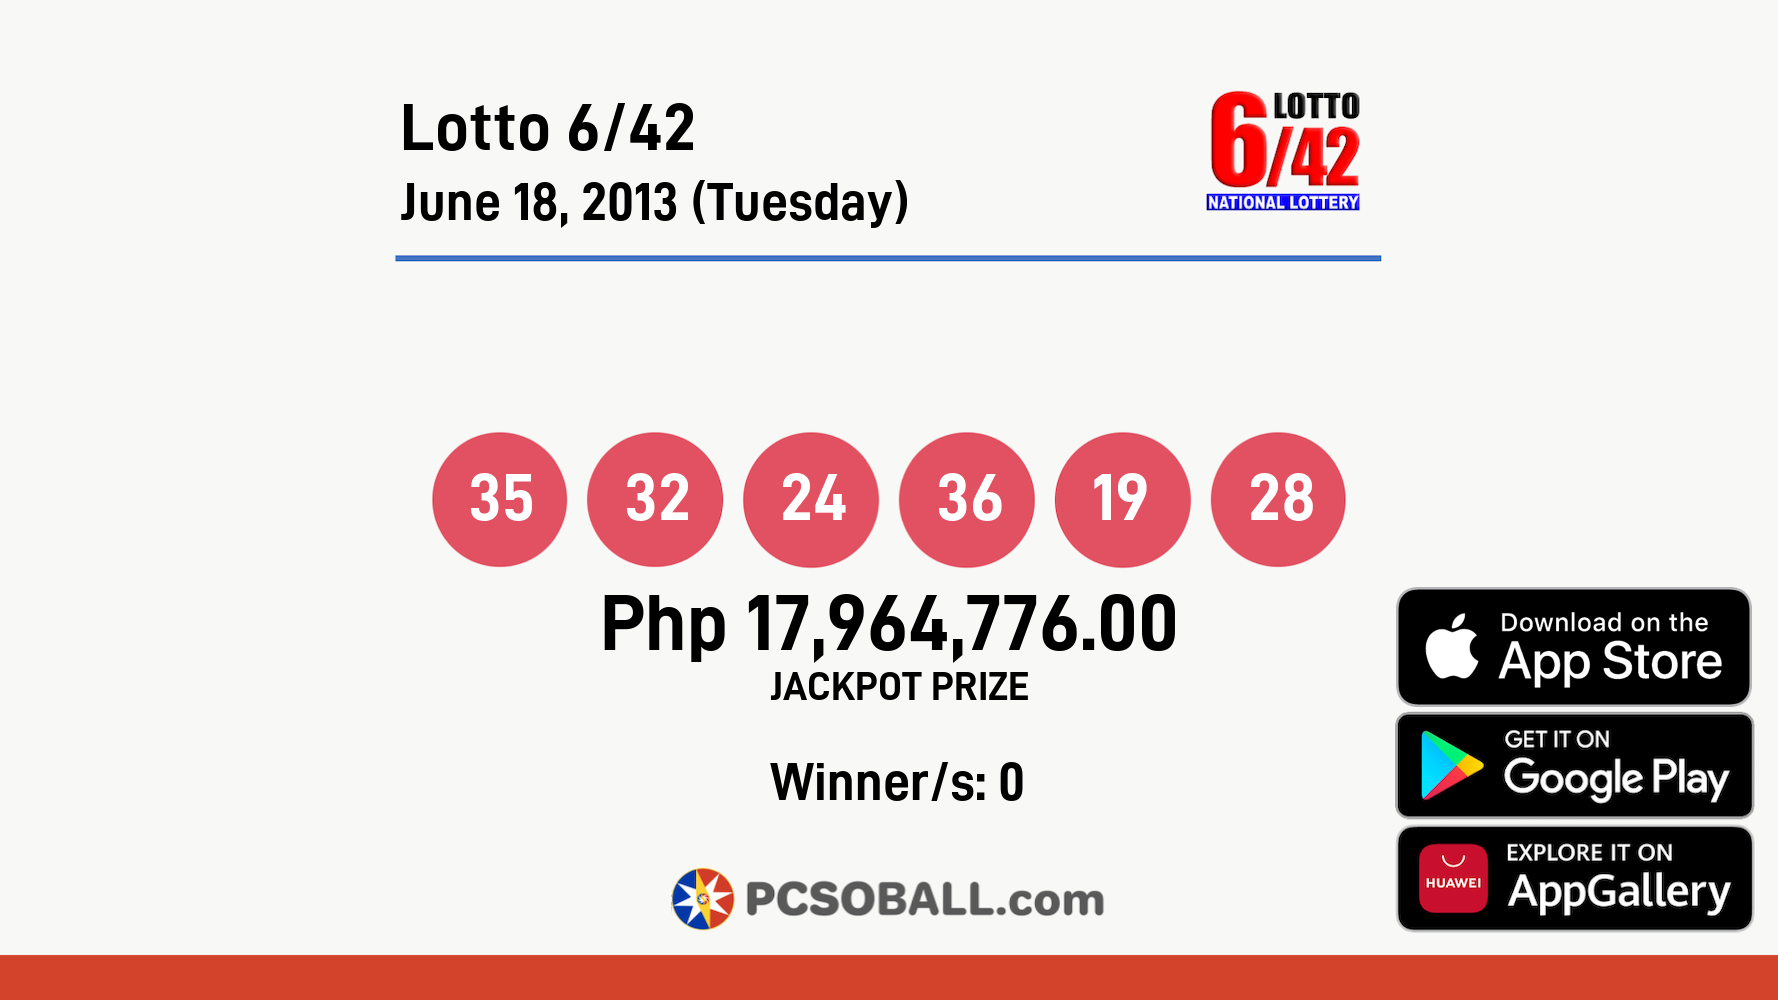 Lotto 6/42 June 18, 2013 (Tuesday) Result